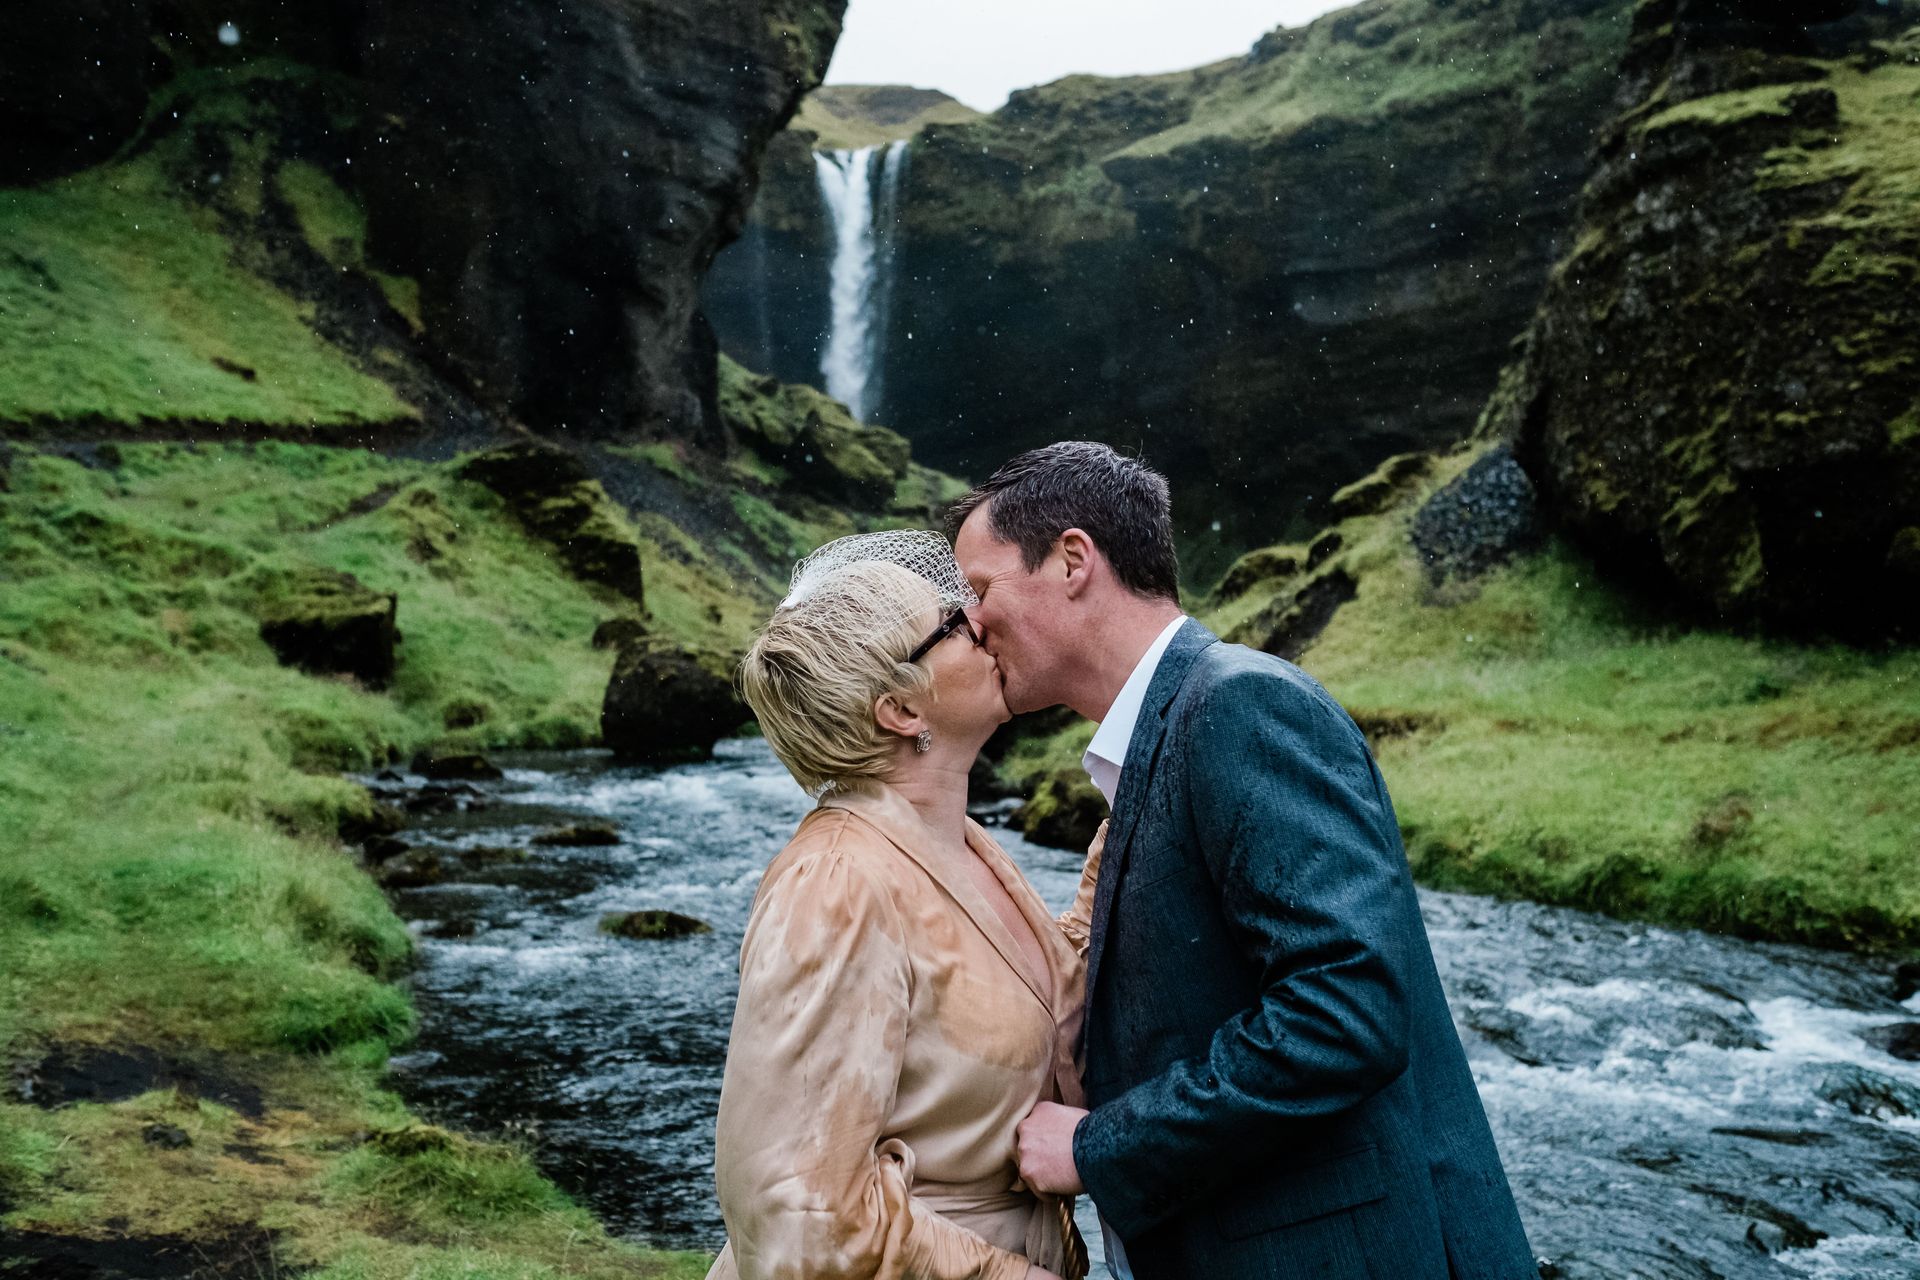 A Summer Rainy Elopement at Kvernufoss Waterfall in Iceland